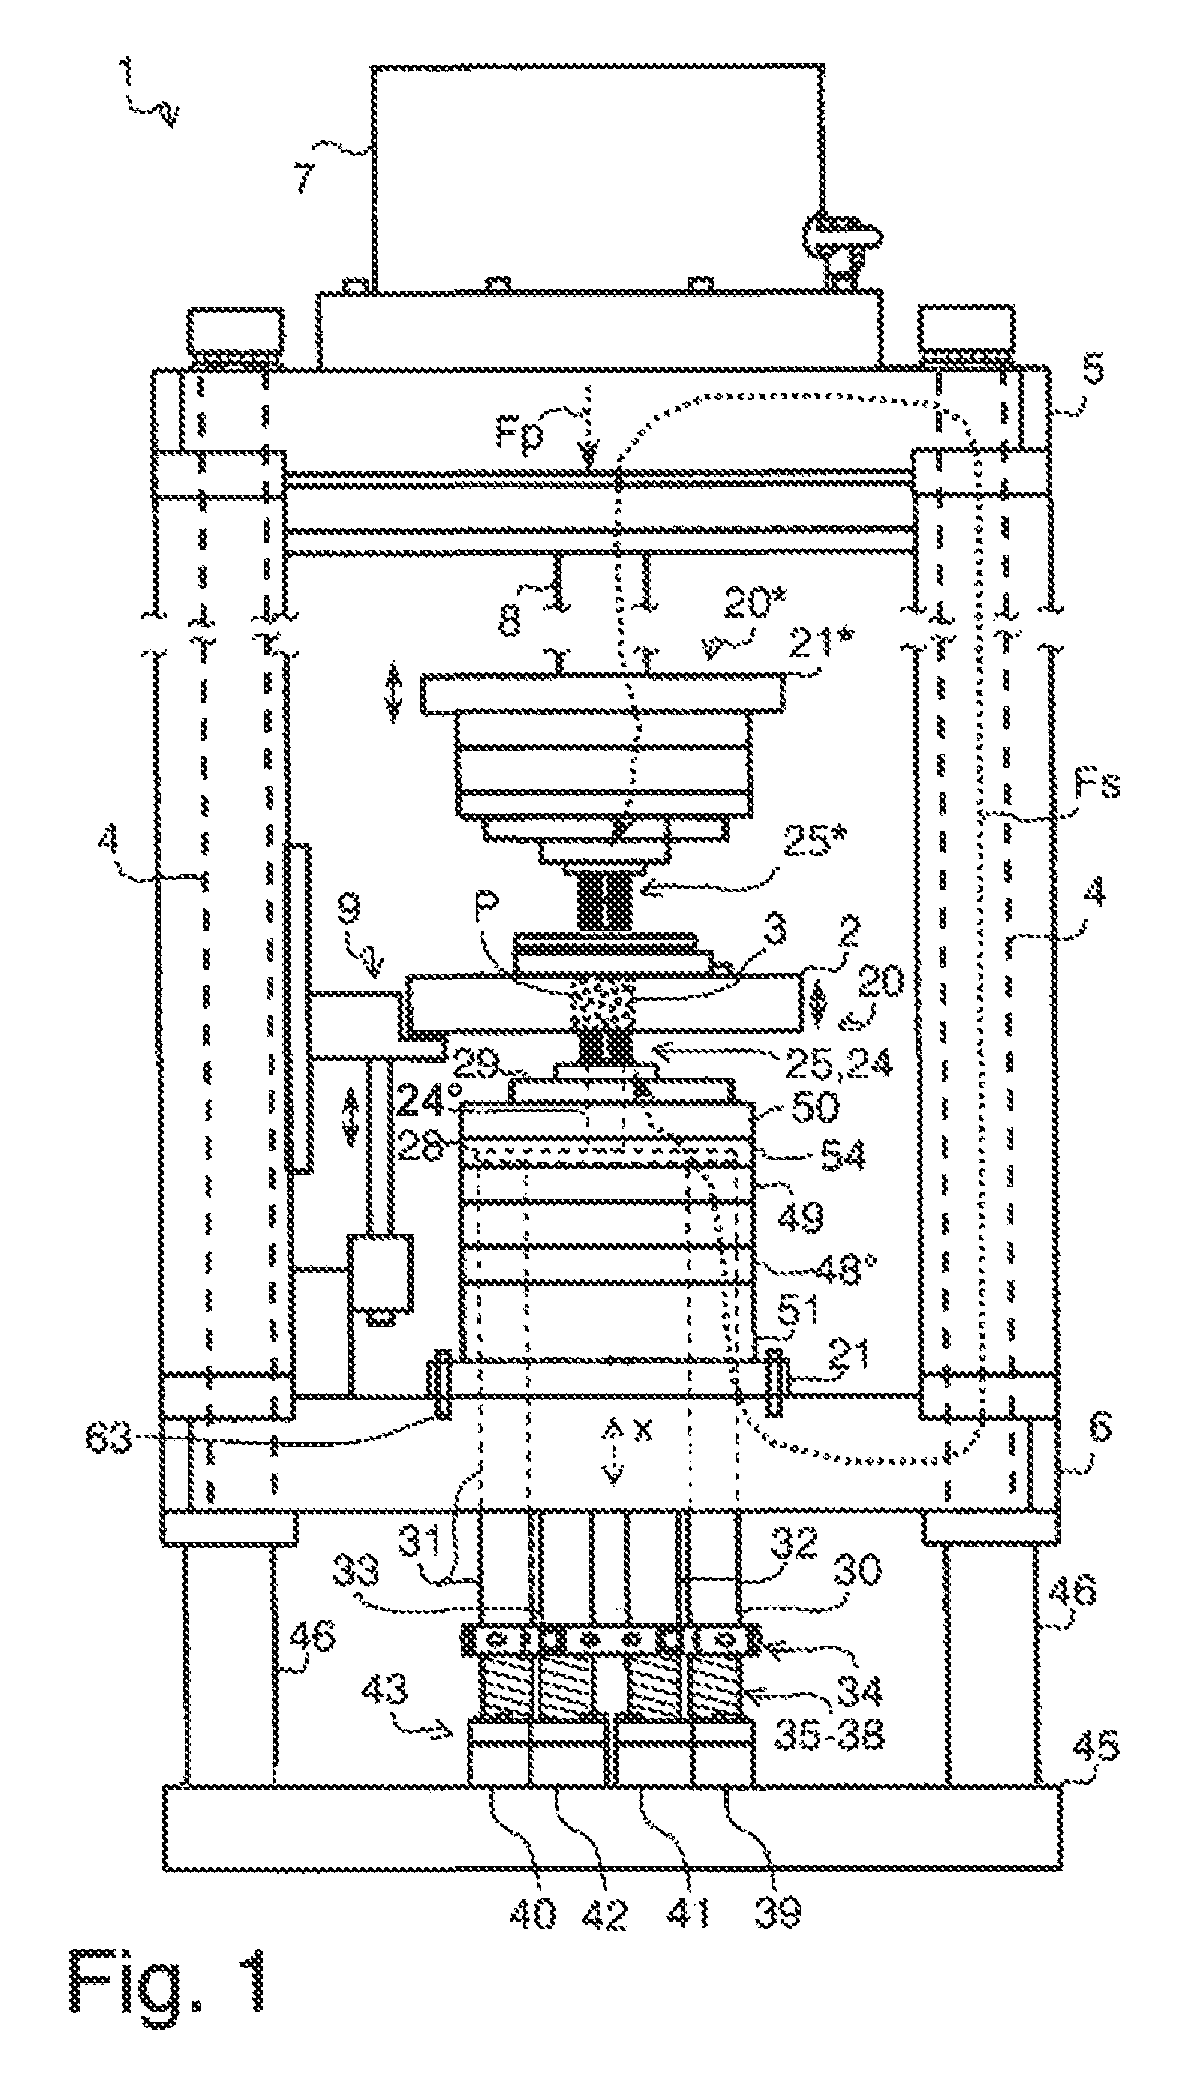 Ceramic-powder and/or metal-powder press tool, ceramic-powder and/or metal-powder press, modular system with such a press tool, method for assembling and operating a ceramic-powder and/or metal-powder press tool or a press